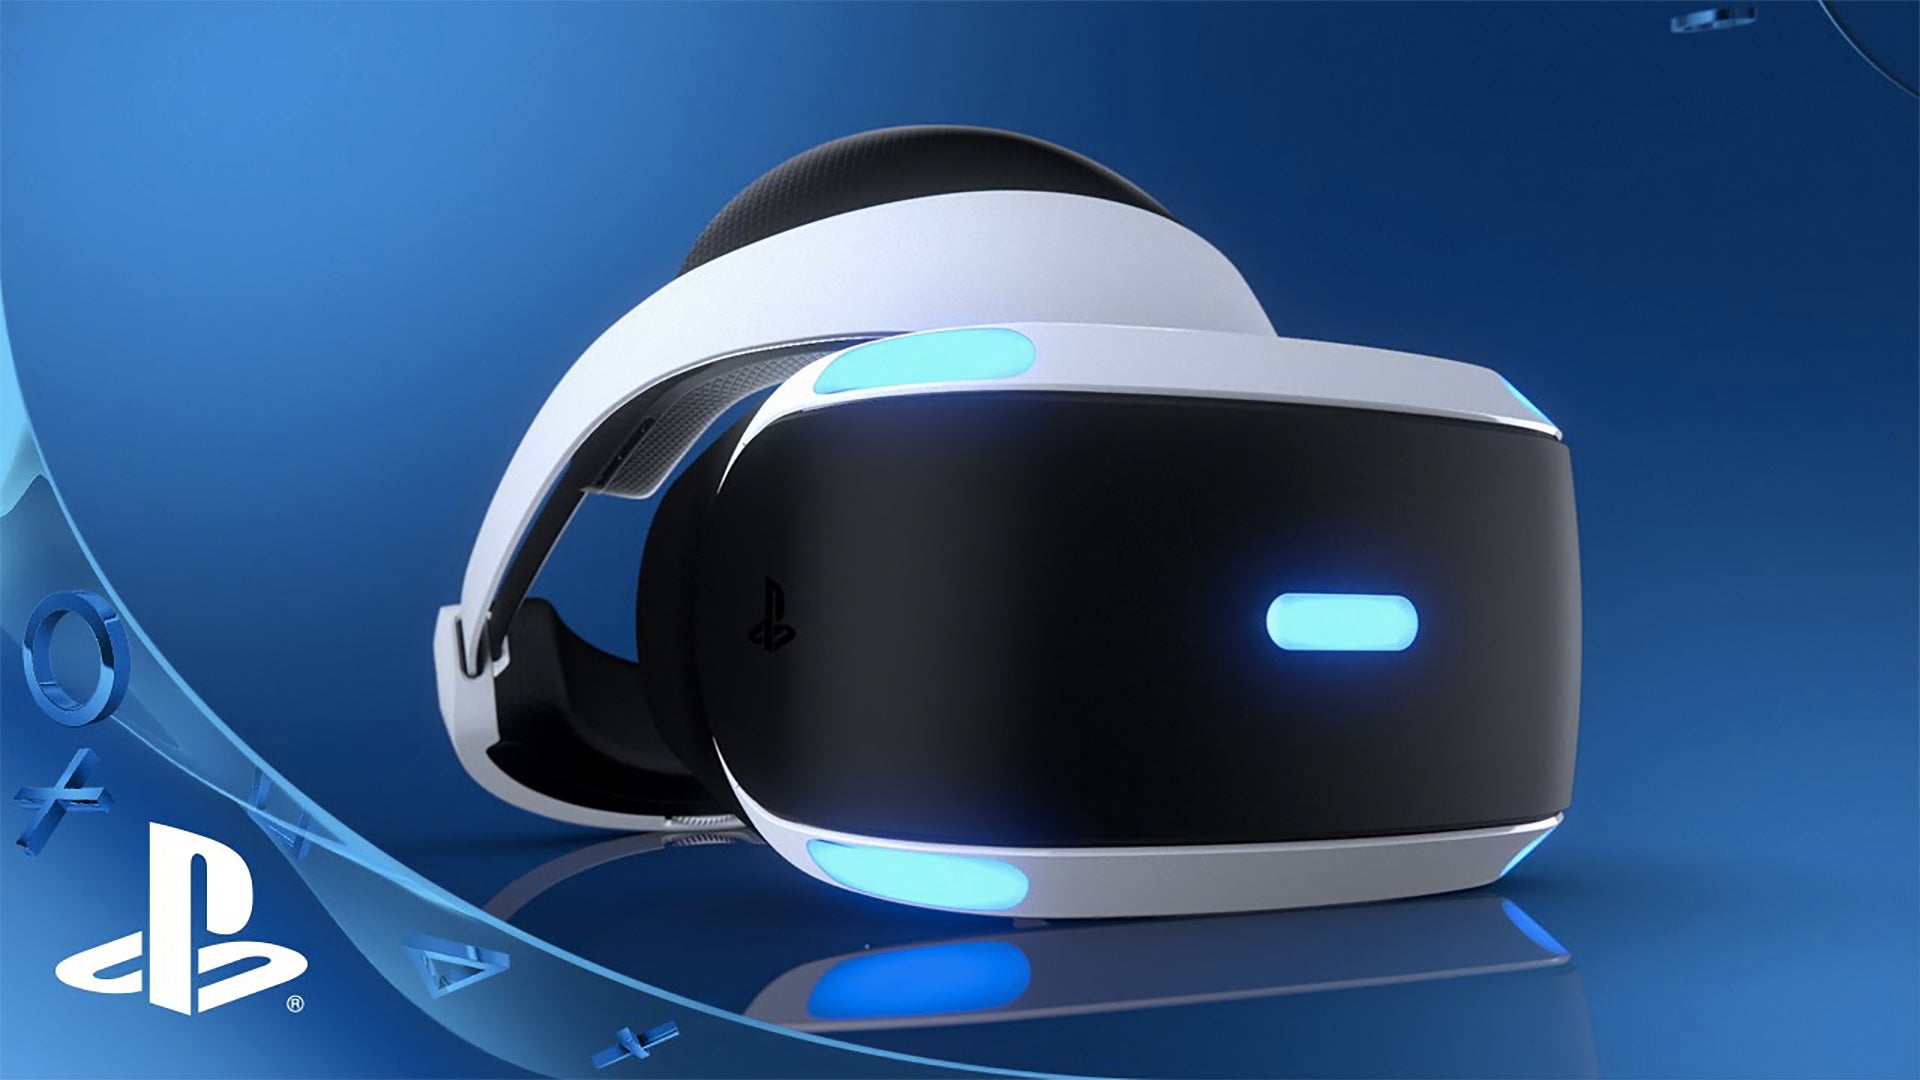 Per Kaarsen donor How do I use PlayStation VR on PS5?